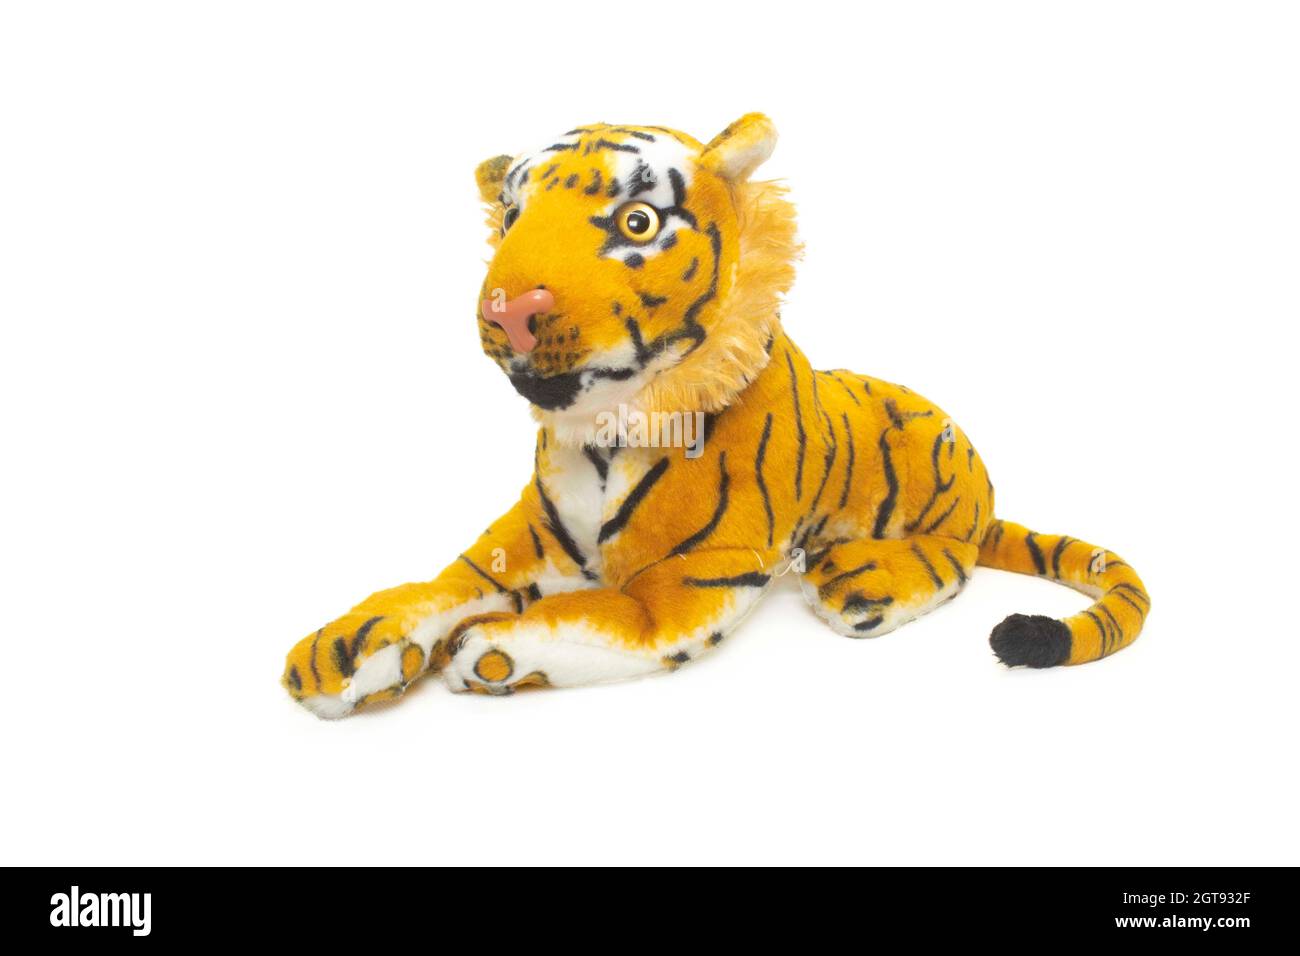 Tiger doll isolated on white background. Bengal tiger doll isolated. Stock Photo